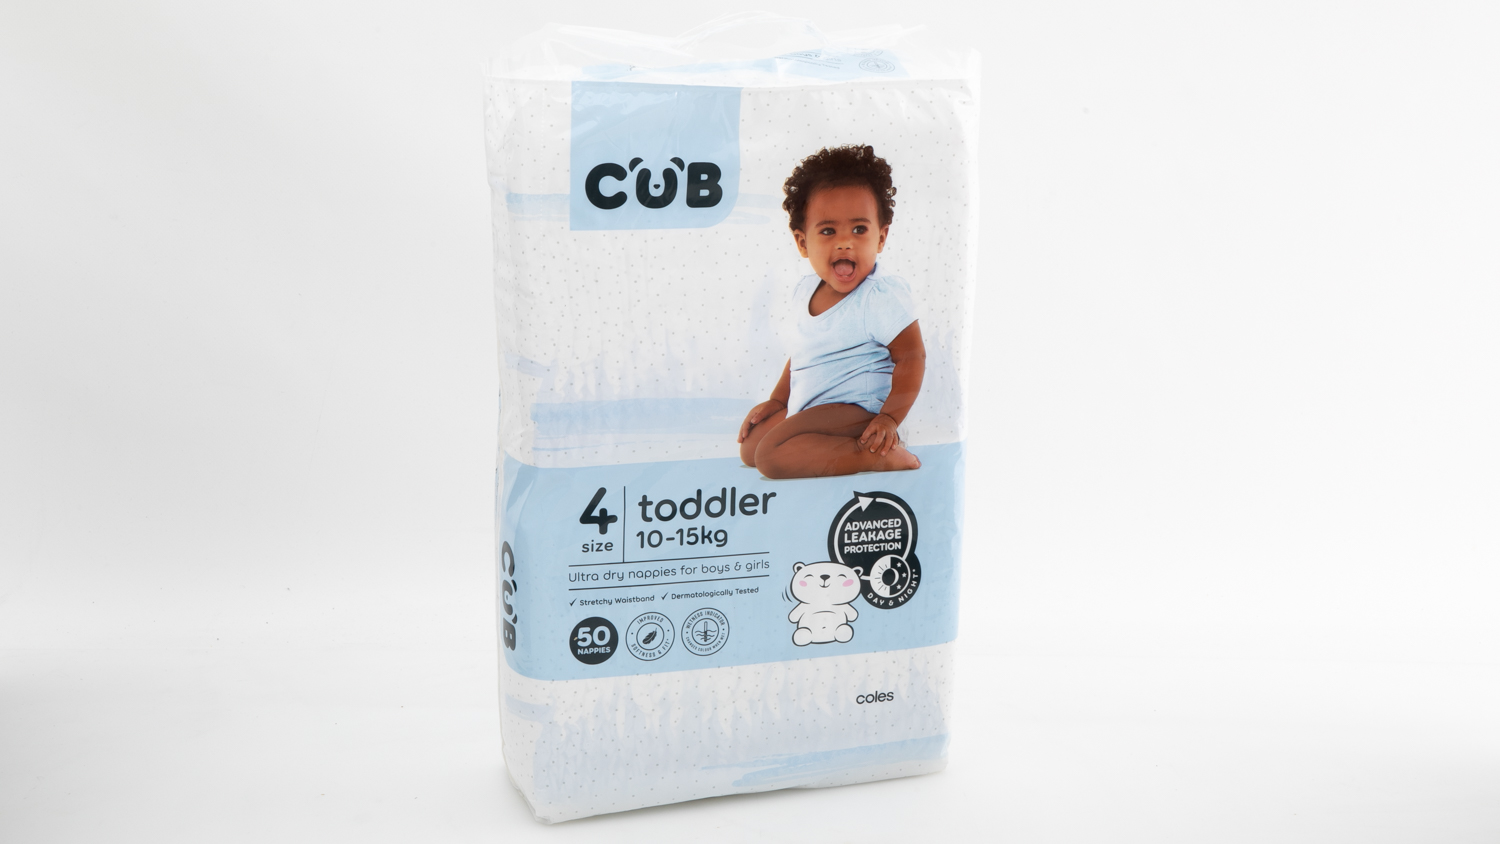 Coles CUB Toddler Size 4 carousel image